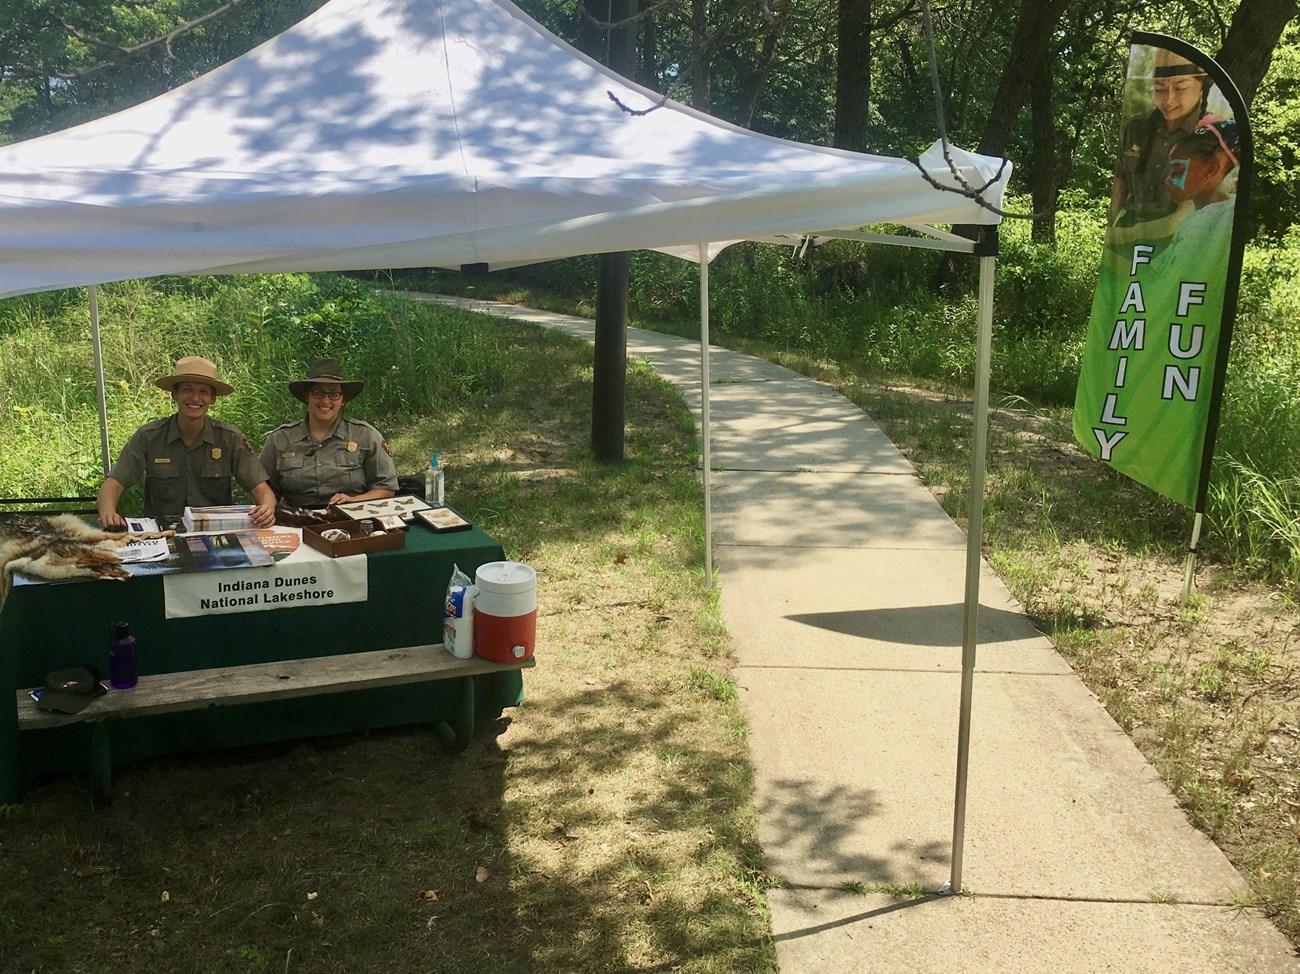 Two park rangers sit at a table under a tent outside.